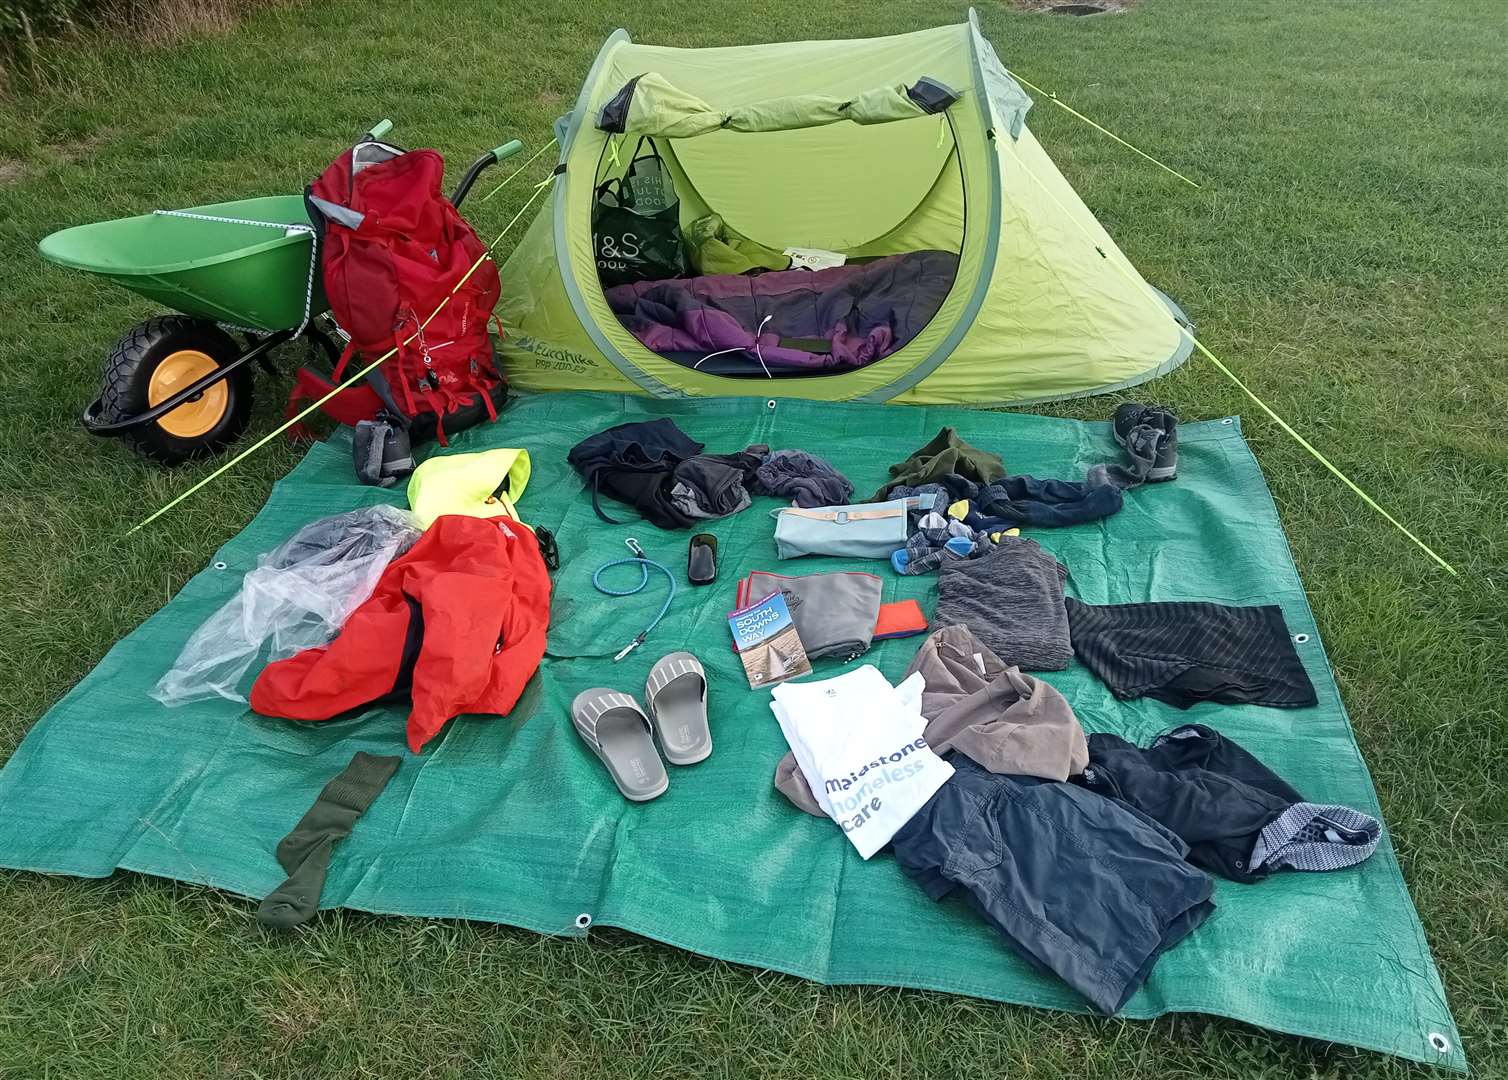 Andrew's possessions and home was carried in a wheelbarrow for the trip. Picture: Andrew Nuttall